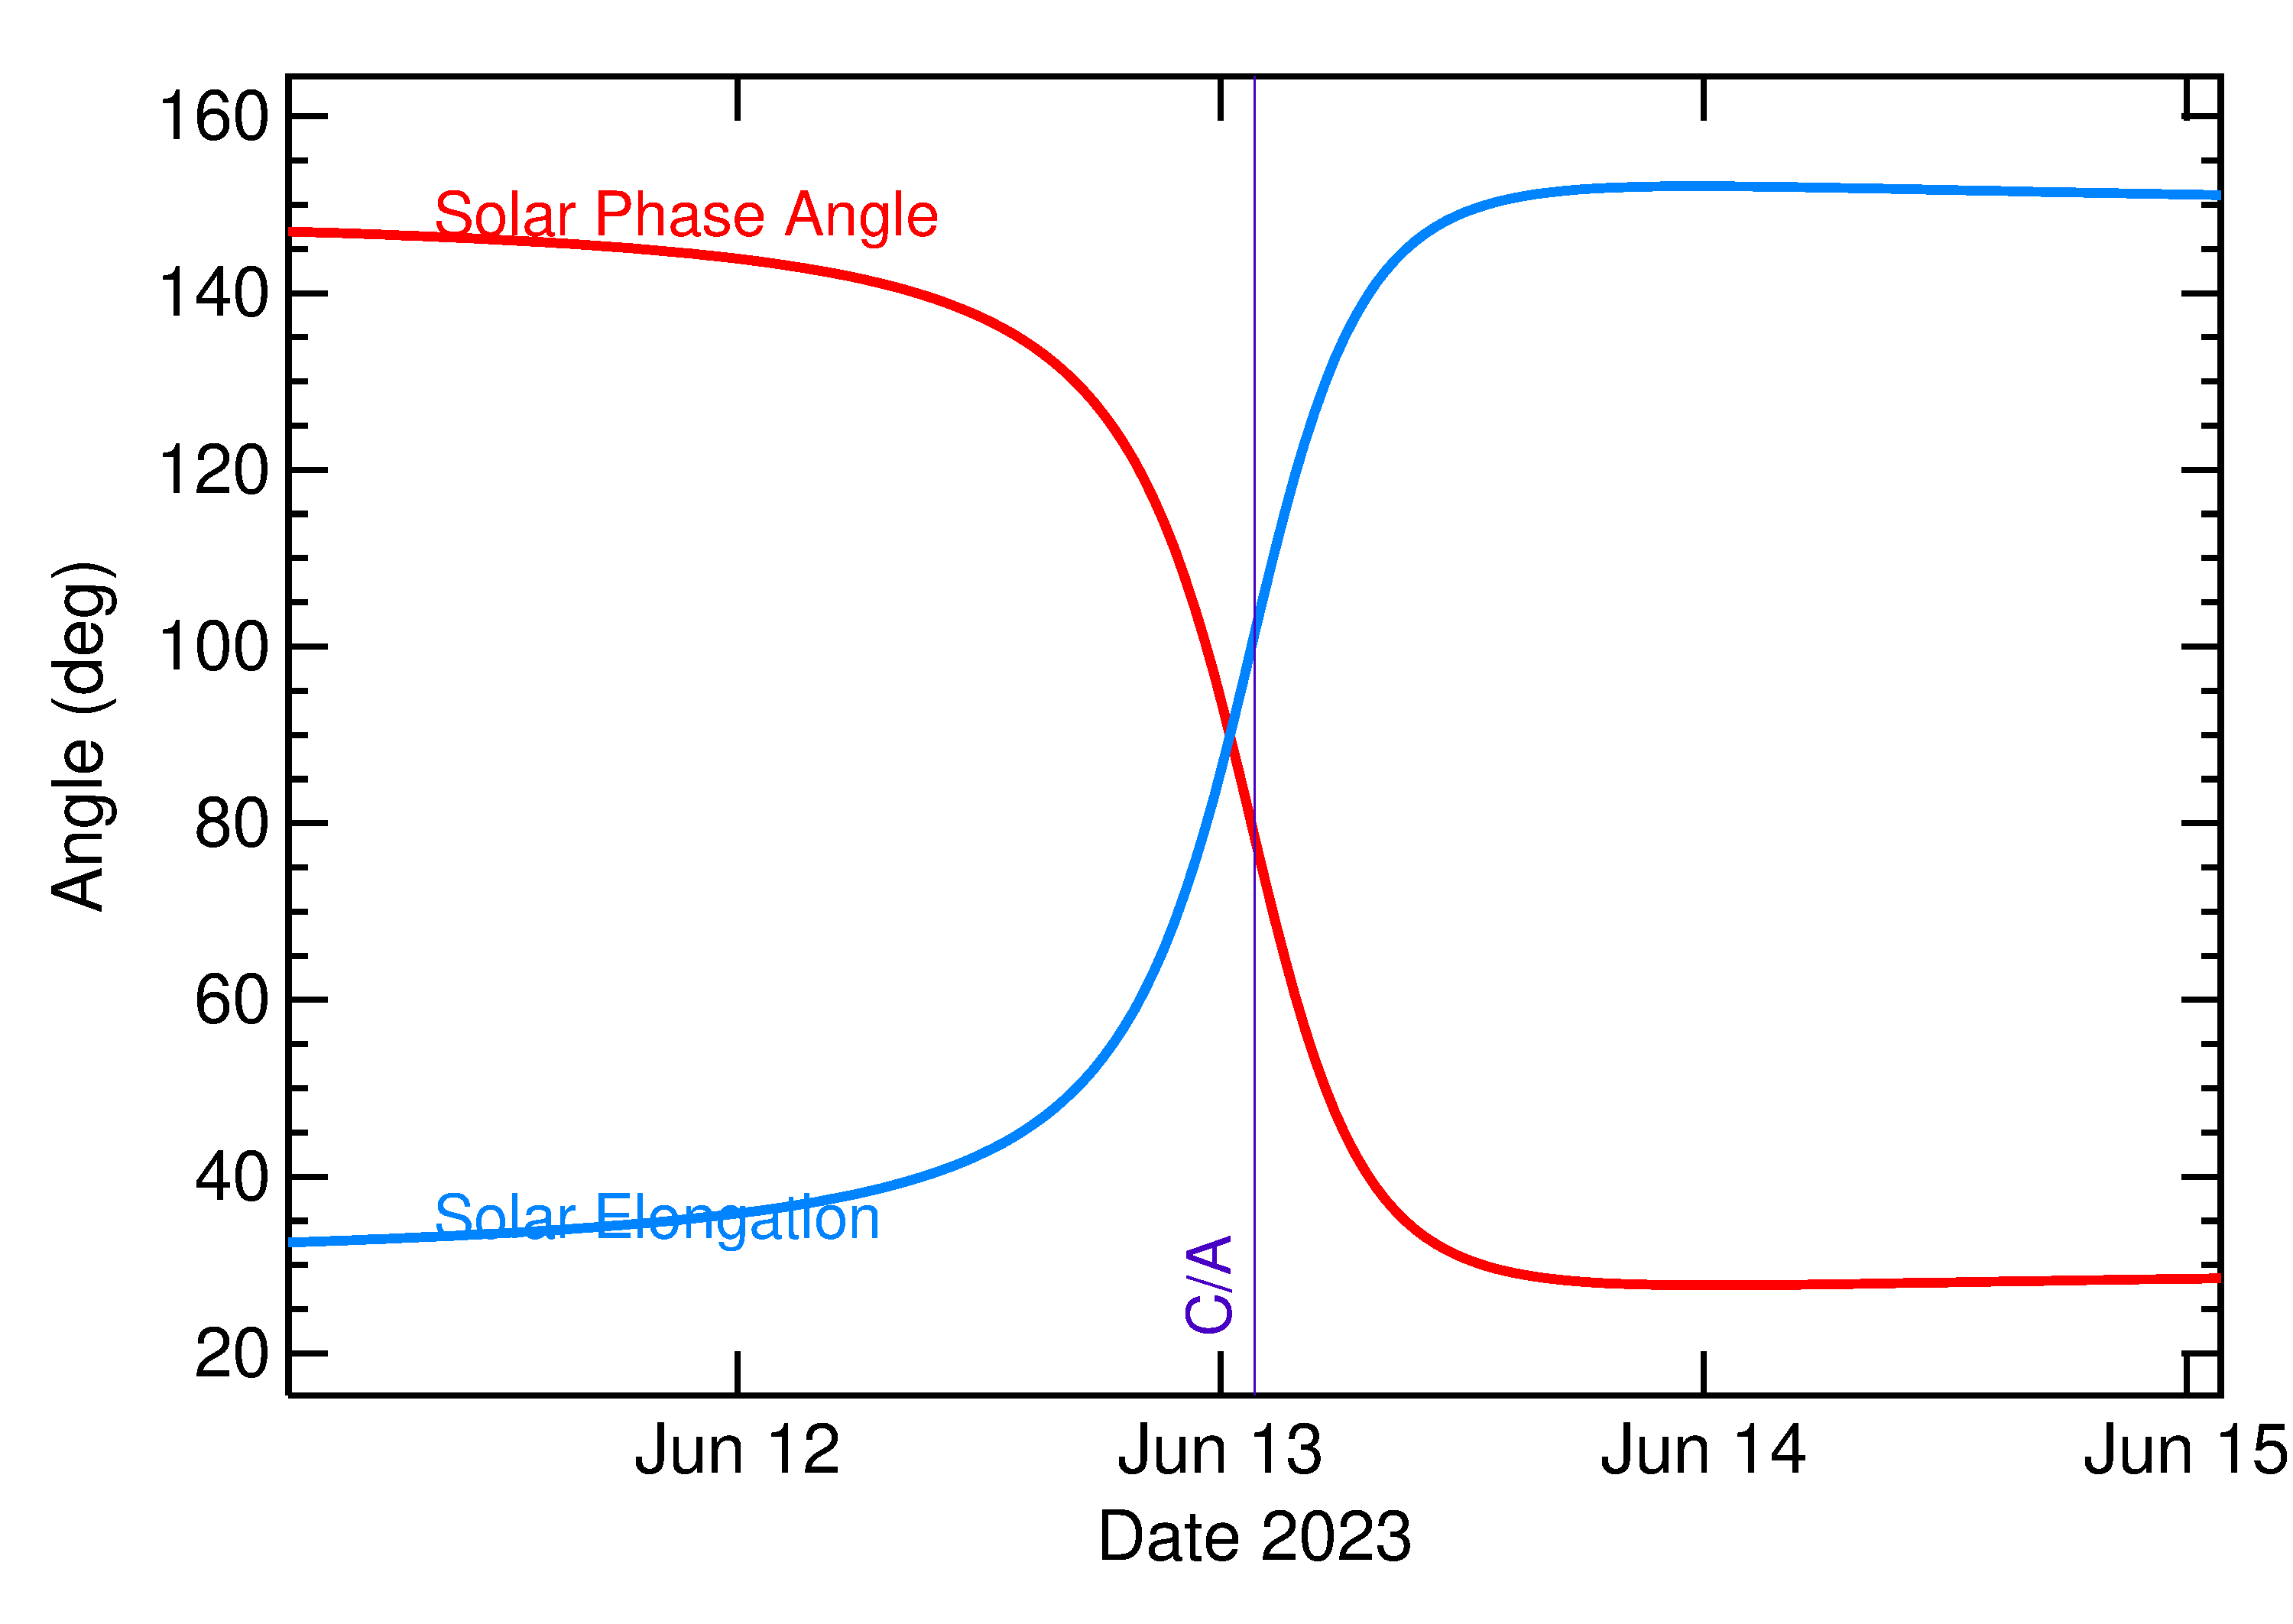 Solar Elongation and Solar Phase Angle of 2023 LP1 in the days around closest approach